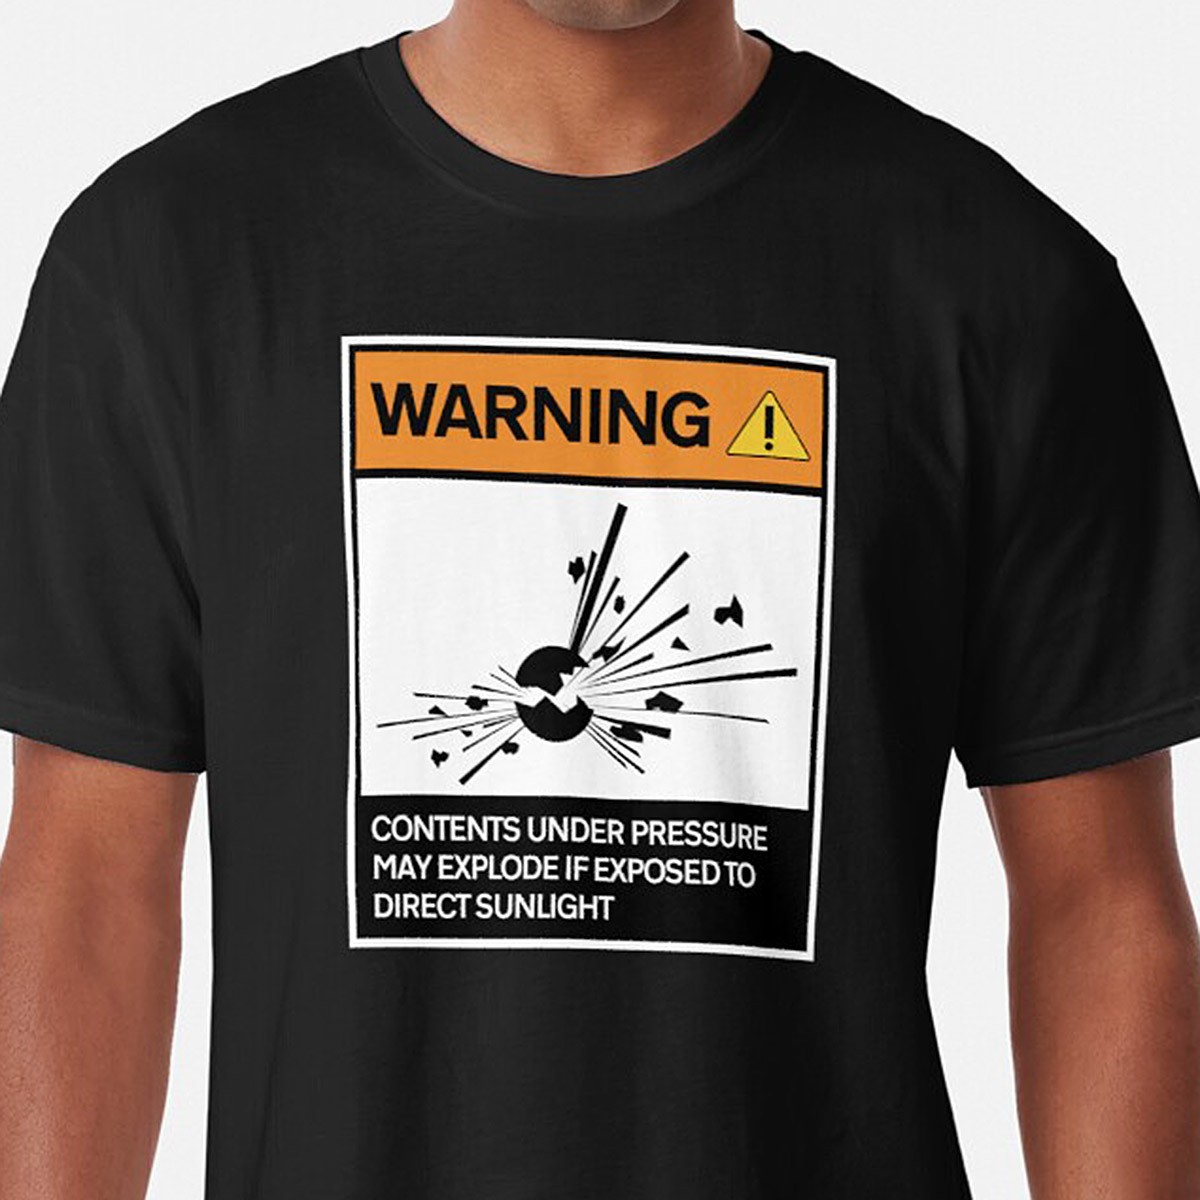 Warning - Contents under pressure! Long T-Shirt by NTK Apparel